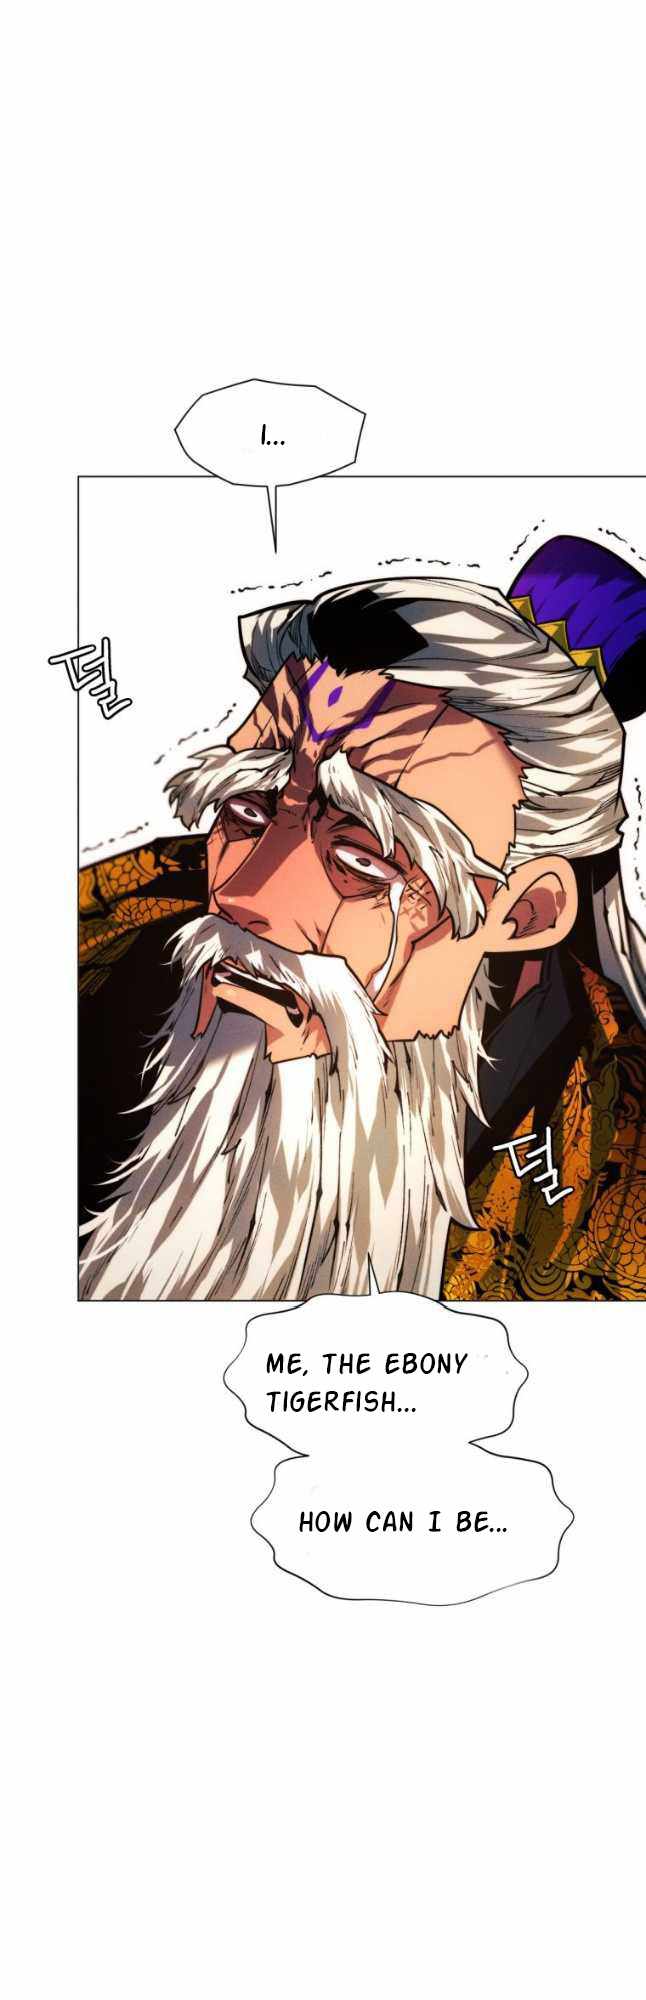 A Modern Man Who Got Transmigrated Into the Murim World Chapter 91